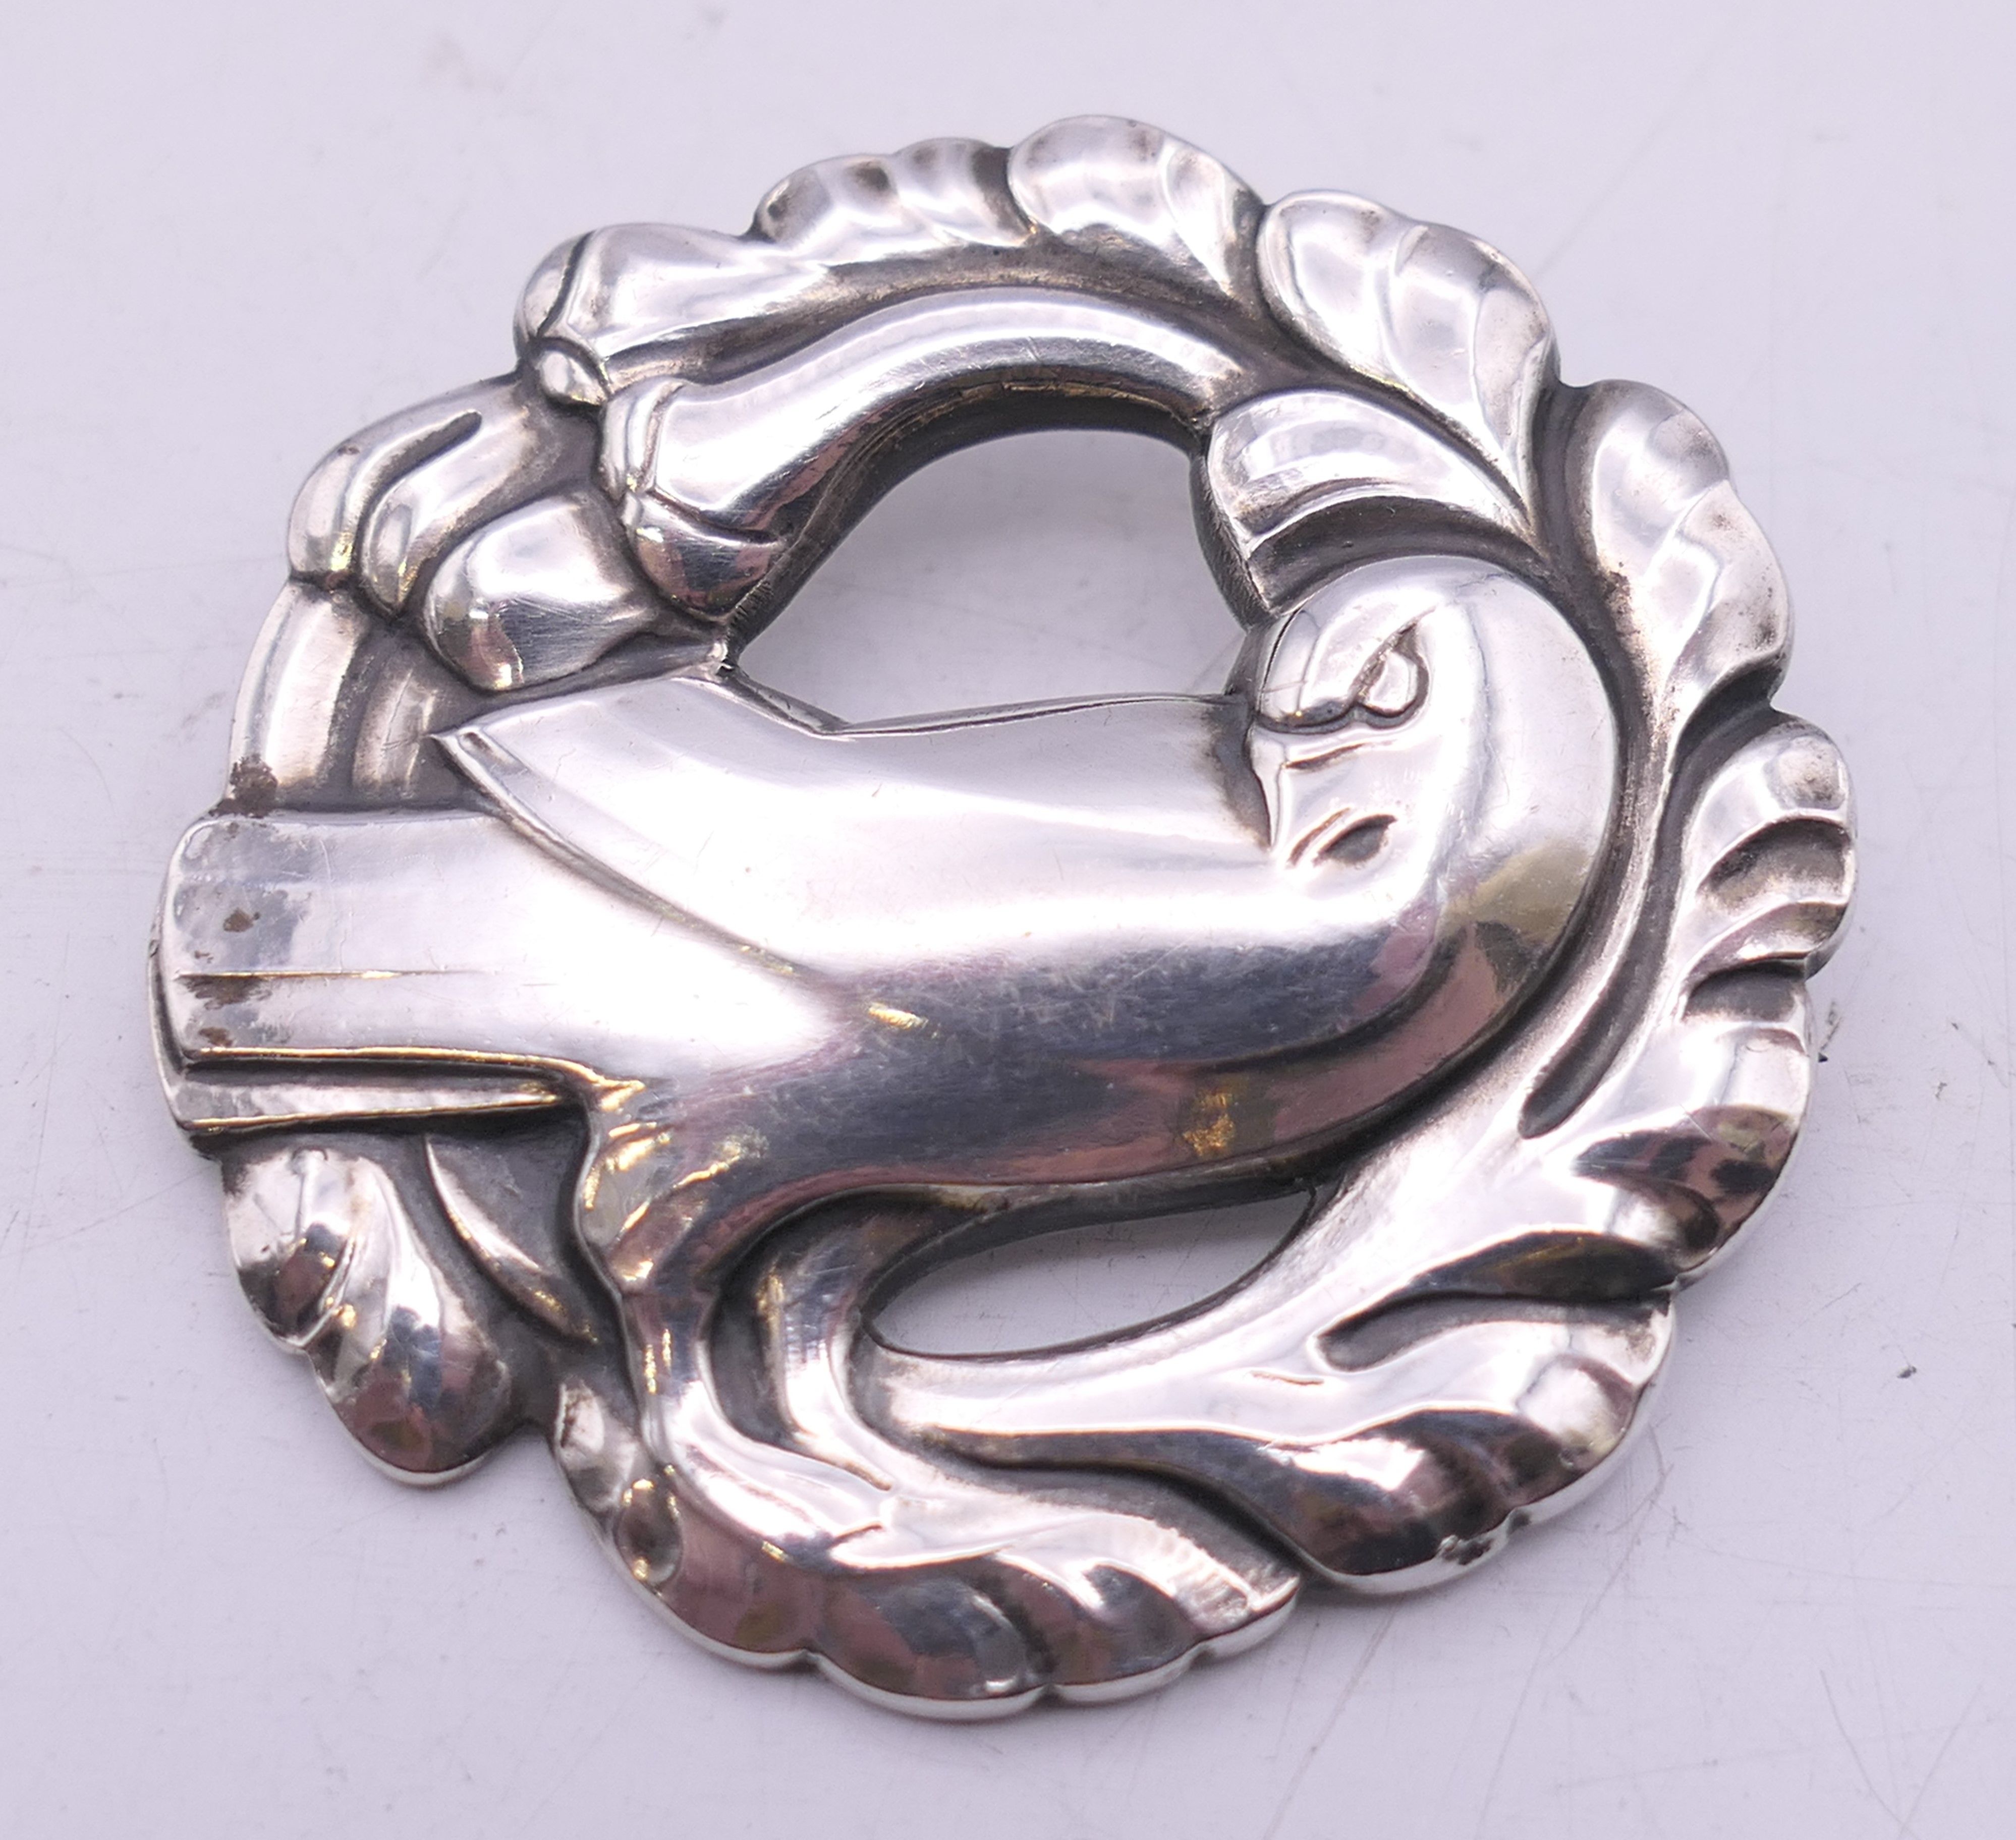 A vintage Georg Jensen circular silver brooch with dove design, numbered 165. 4 cm wide.